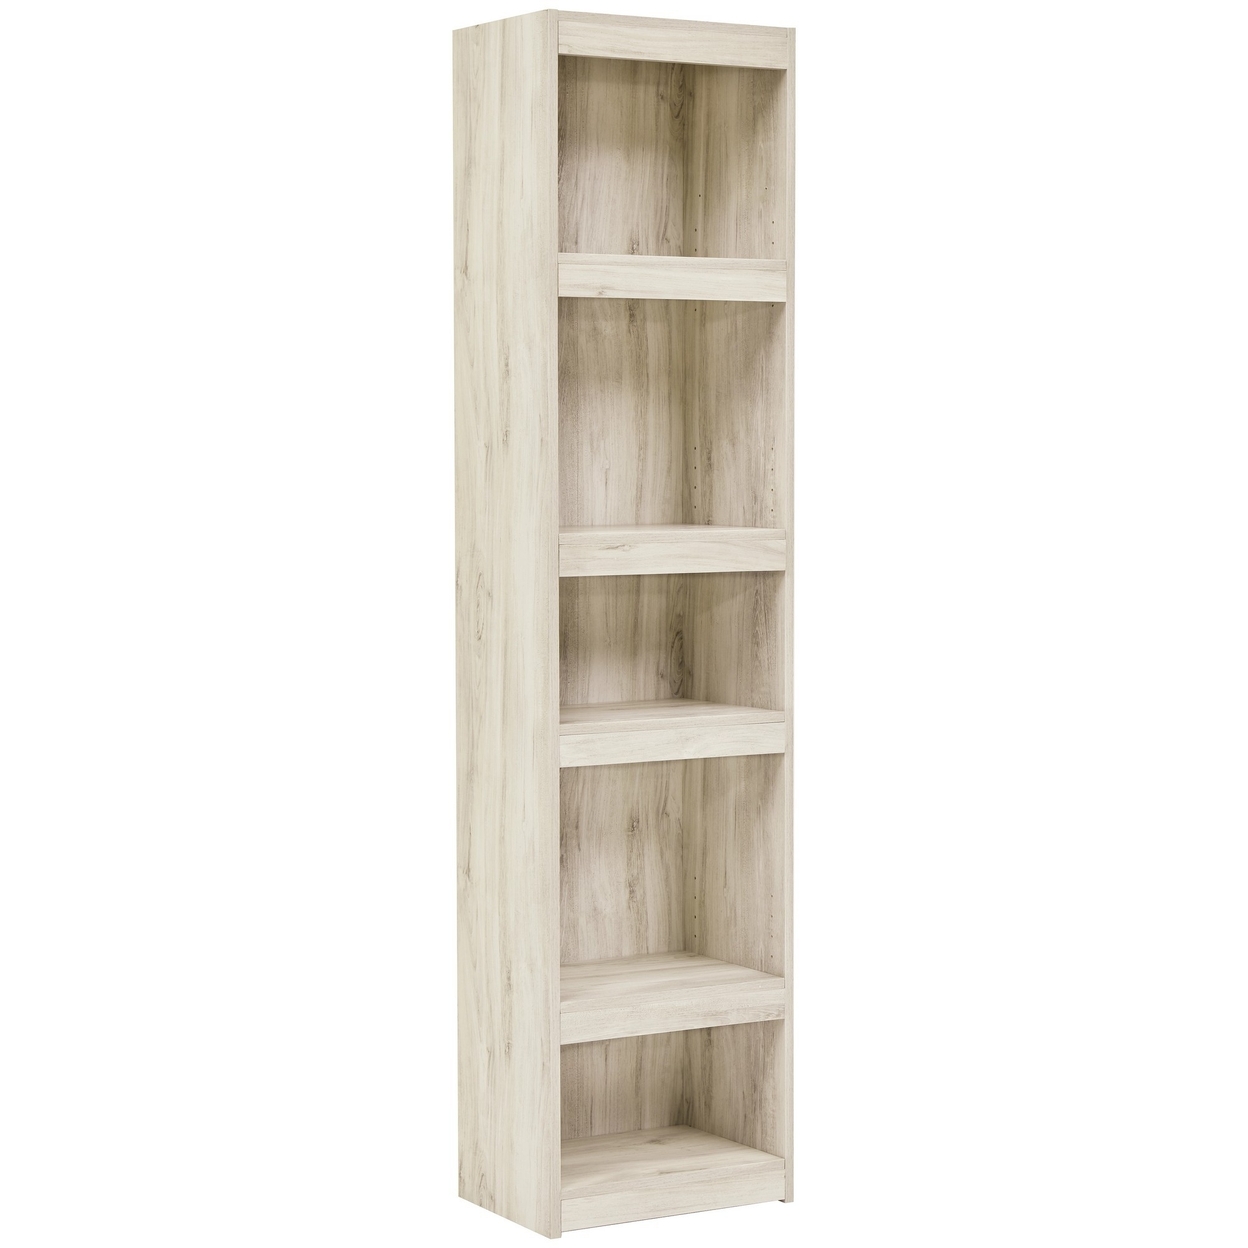 72 Inches 5 Tier Wooden Pier With Adjustable Shelves, Washed White- Saltoro Sherpi